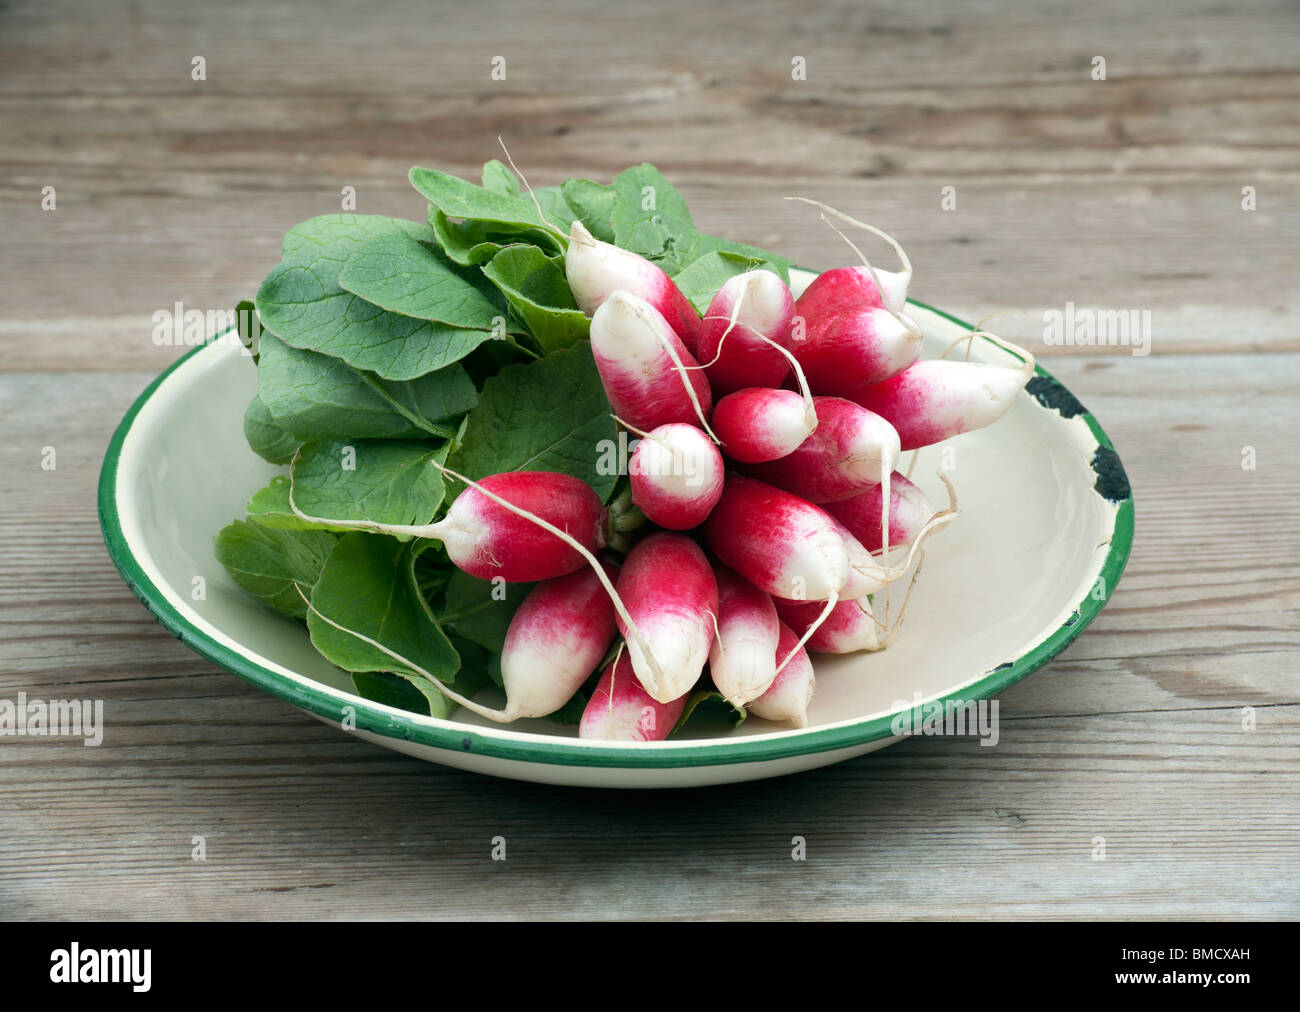 A Bunch Of Fresh French Breakfast Radish In A Enamel Dish, On A Wooden Kitchen Table Stock Photo